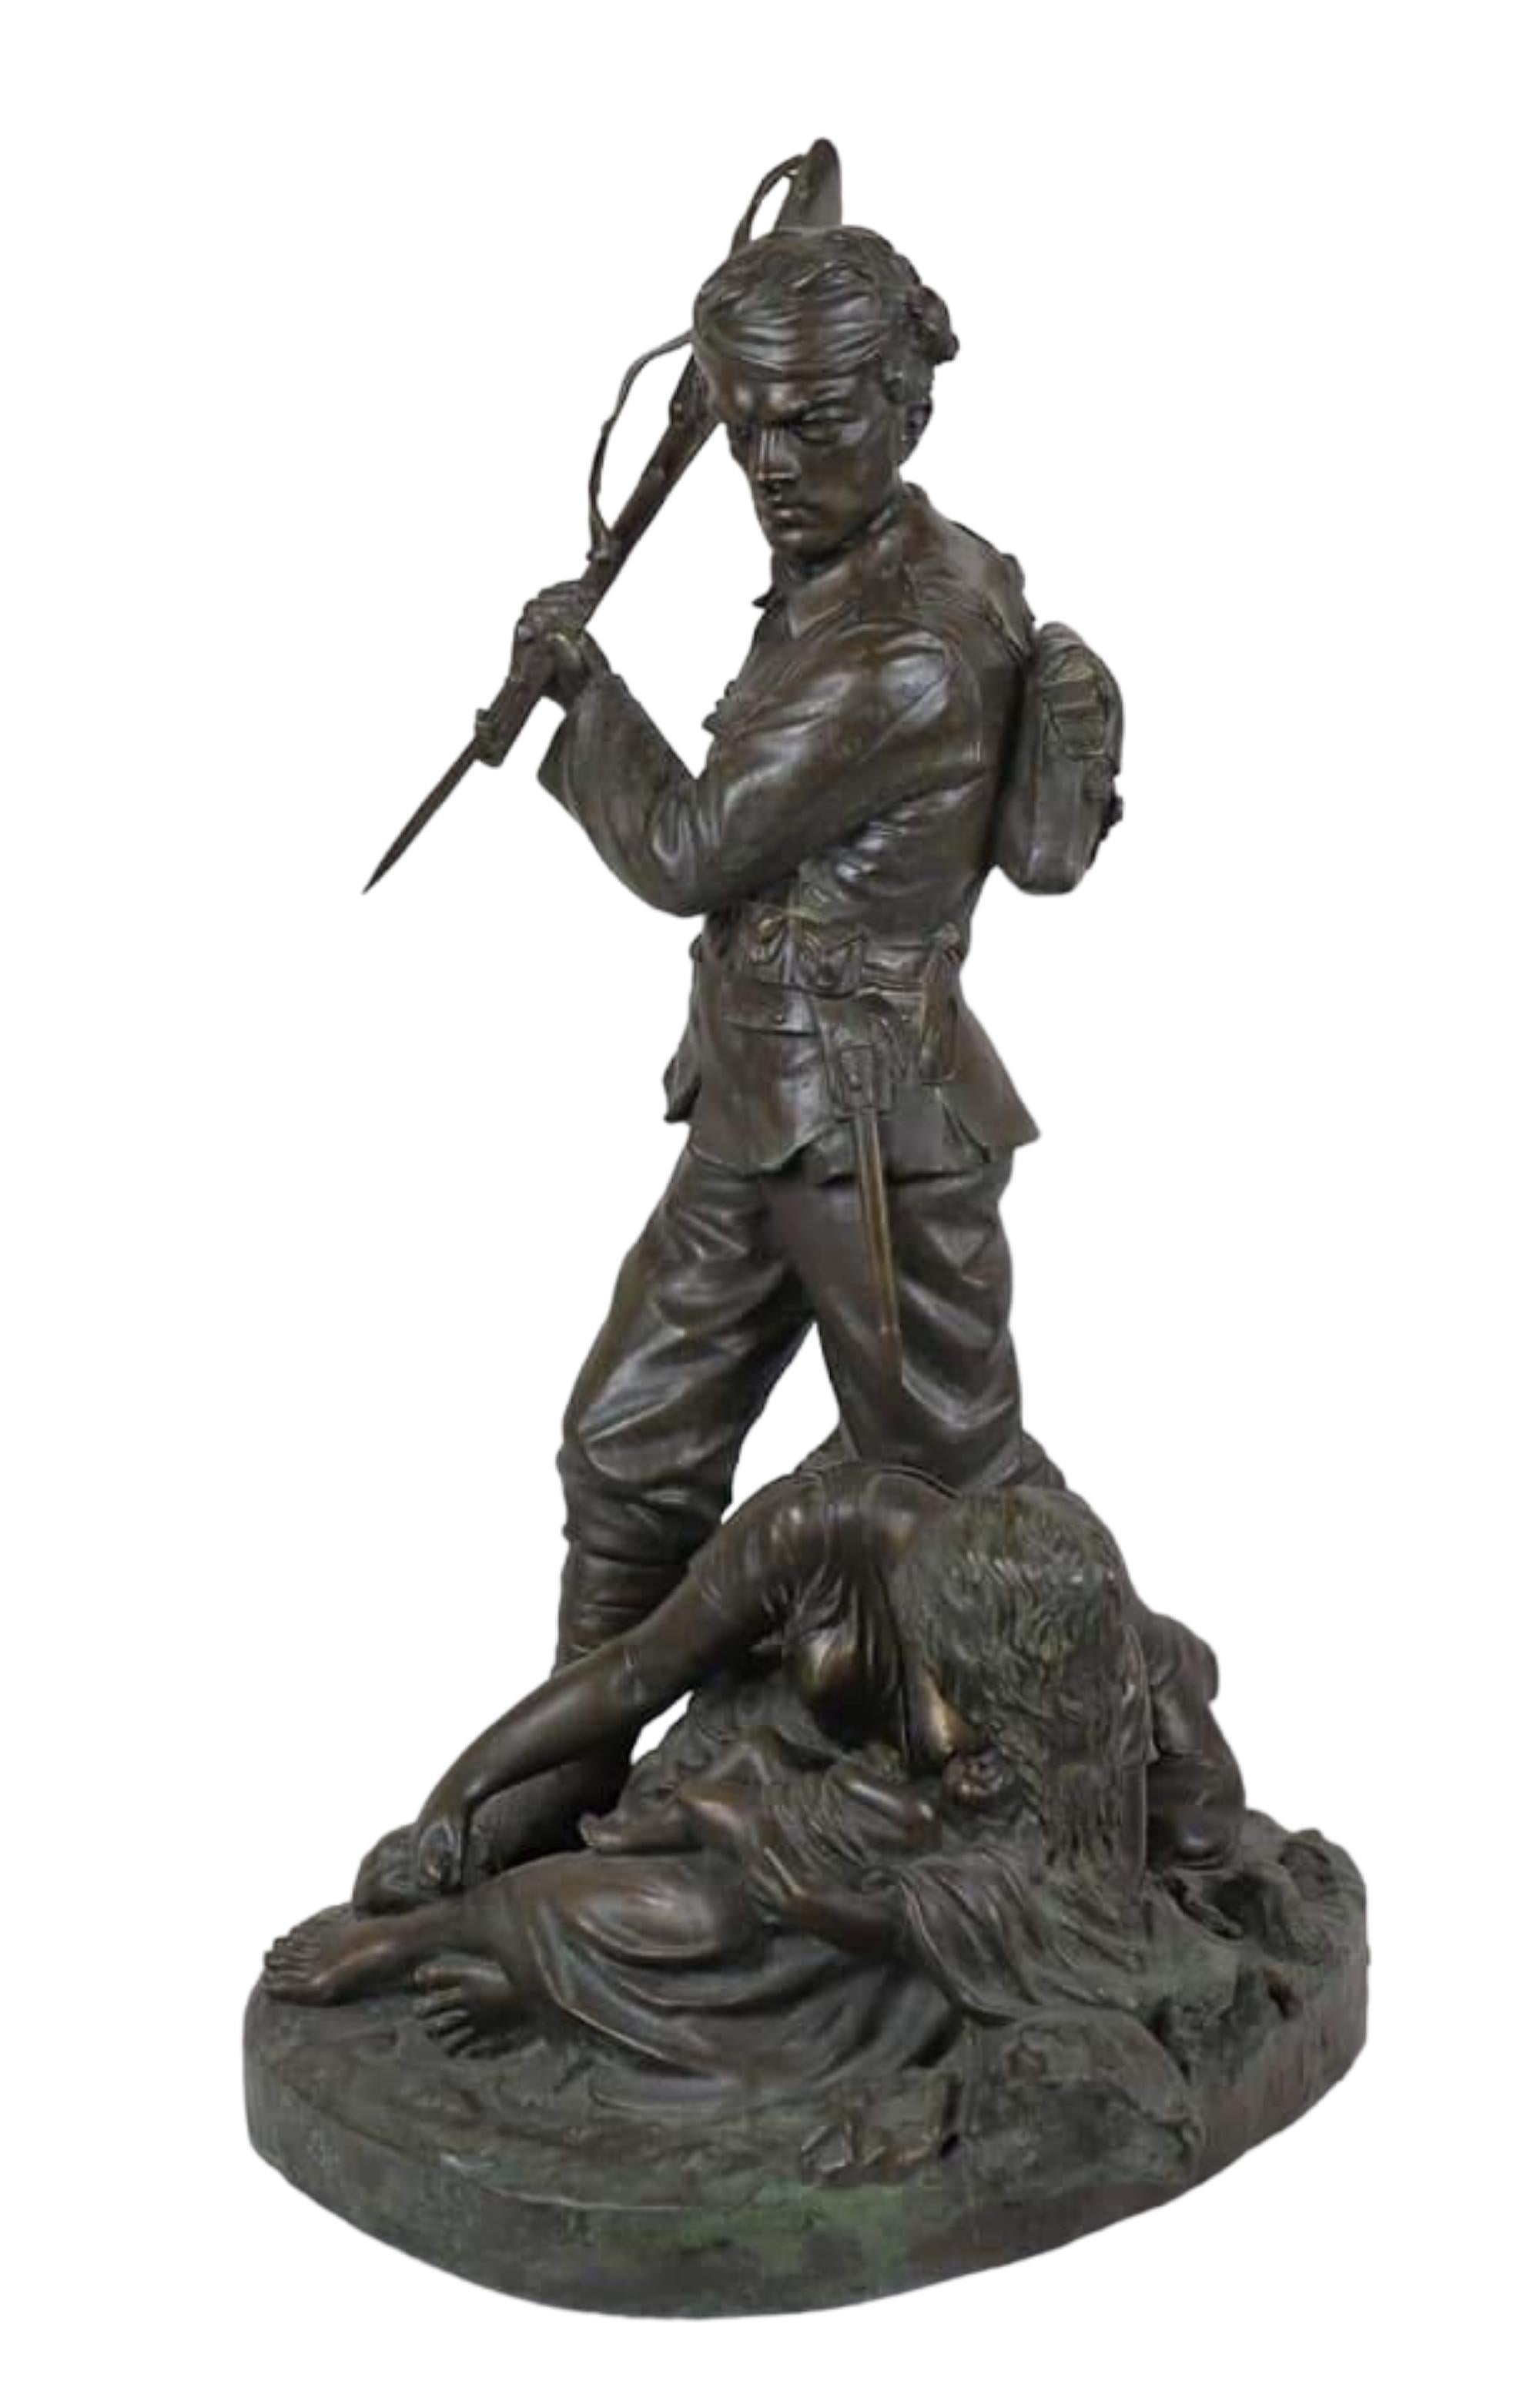 Richard Claude Belt (English, 1851-1921)

Signed: R. Belt 1918 (base verso)

" Casualties of War " 1918

Bronze

Height 26"

Width  15"

Depth  13"

In very good original condition with nice patina.

When observing this piece, some believe the